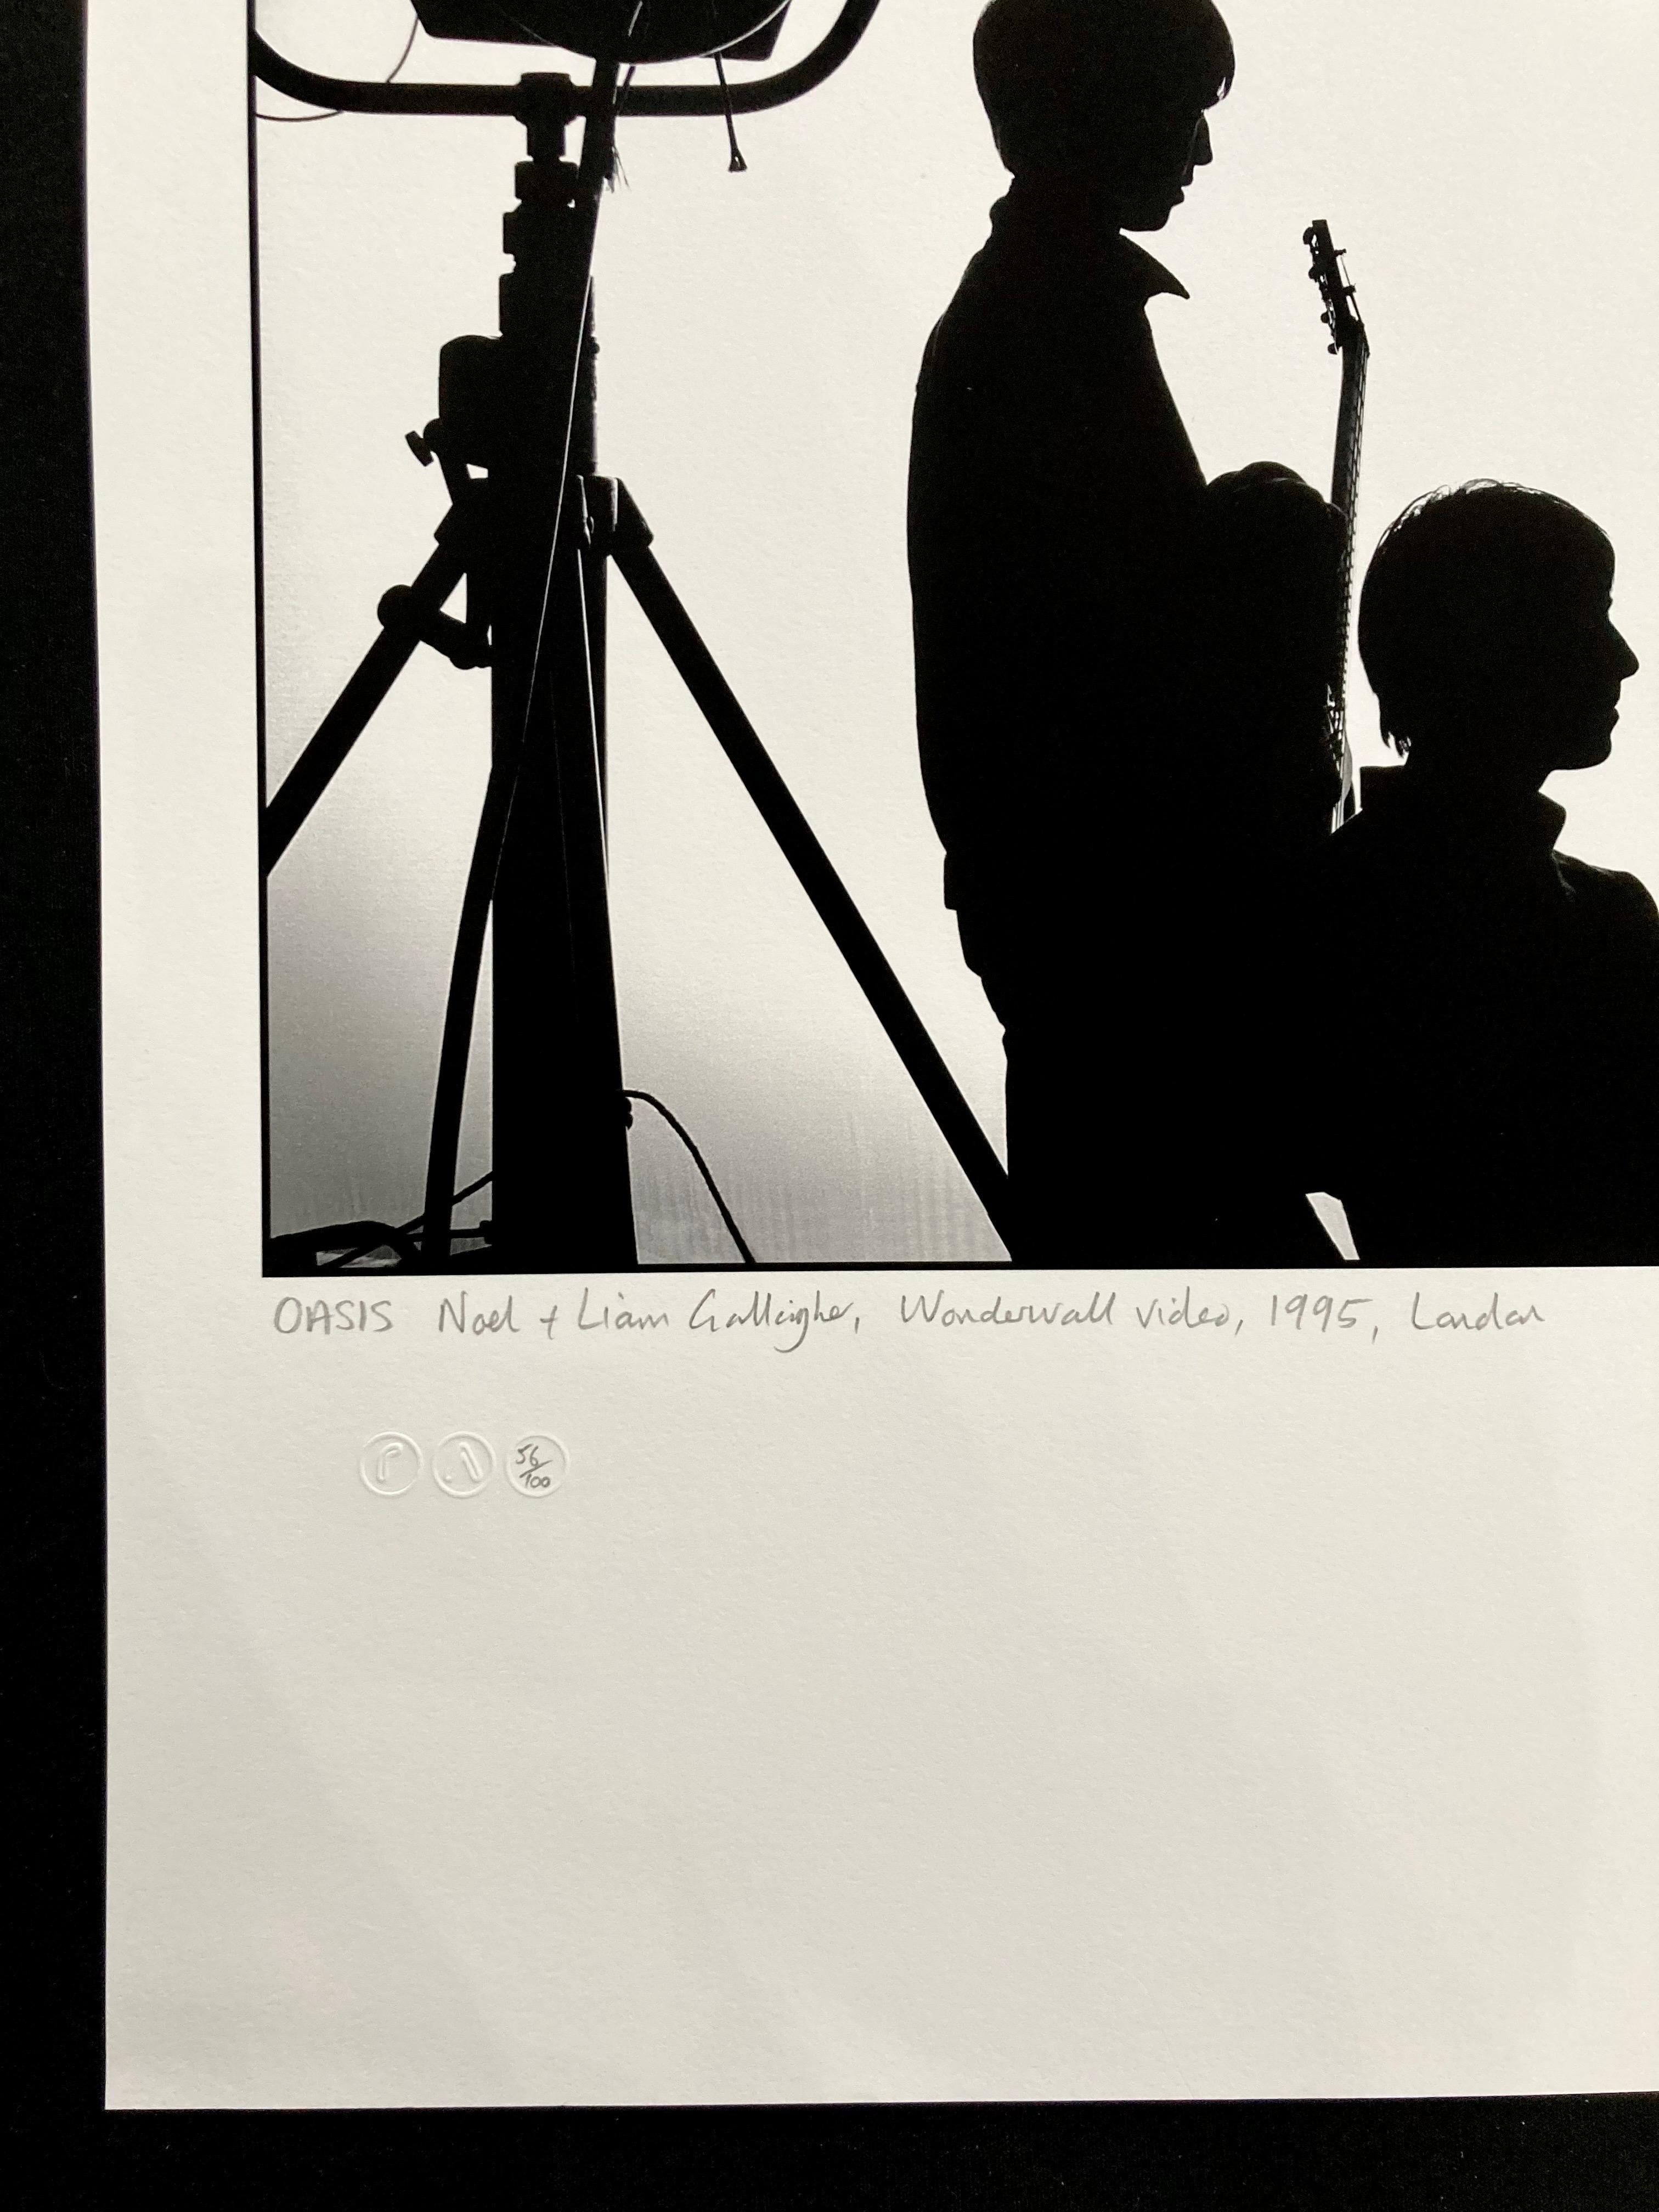 Signed limited edition print. Silhouette portrait of Liam and Noel Gallagher of Oasis taken by celebrated rock photographer, Jill Furmanovsky during a break in the making of the Wonderwall video.  Signed limited edition photo.

Location: